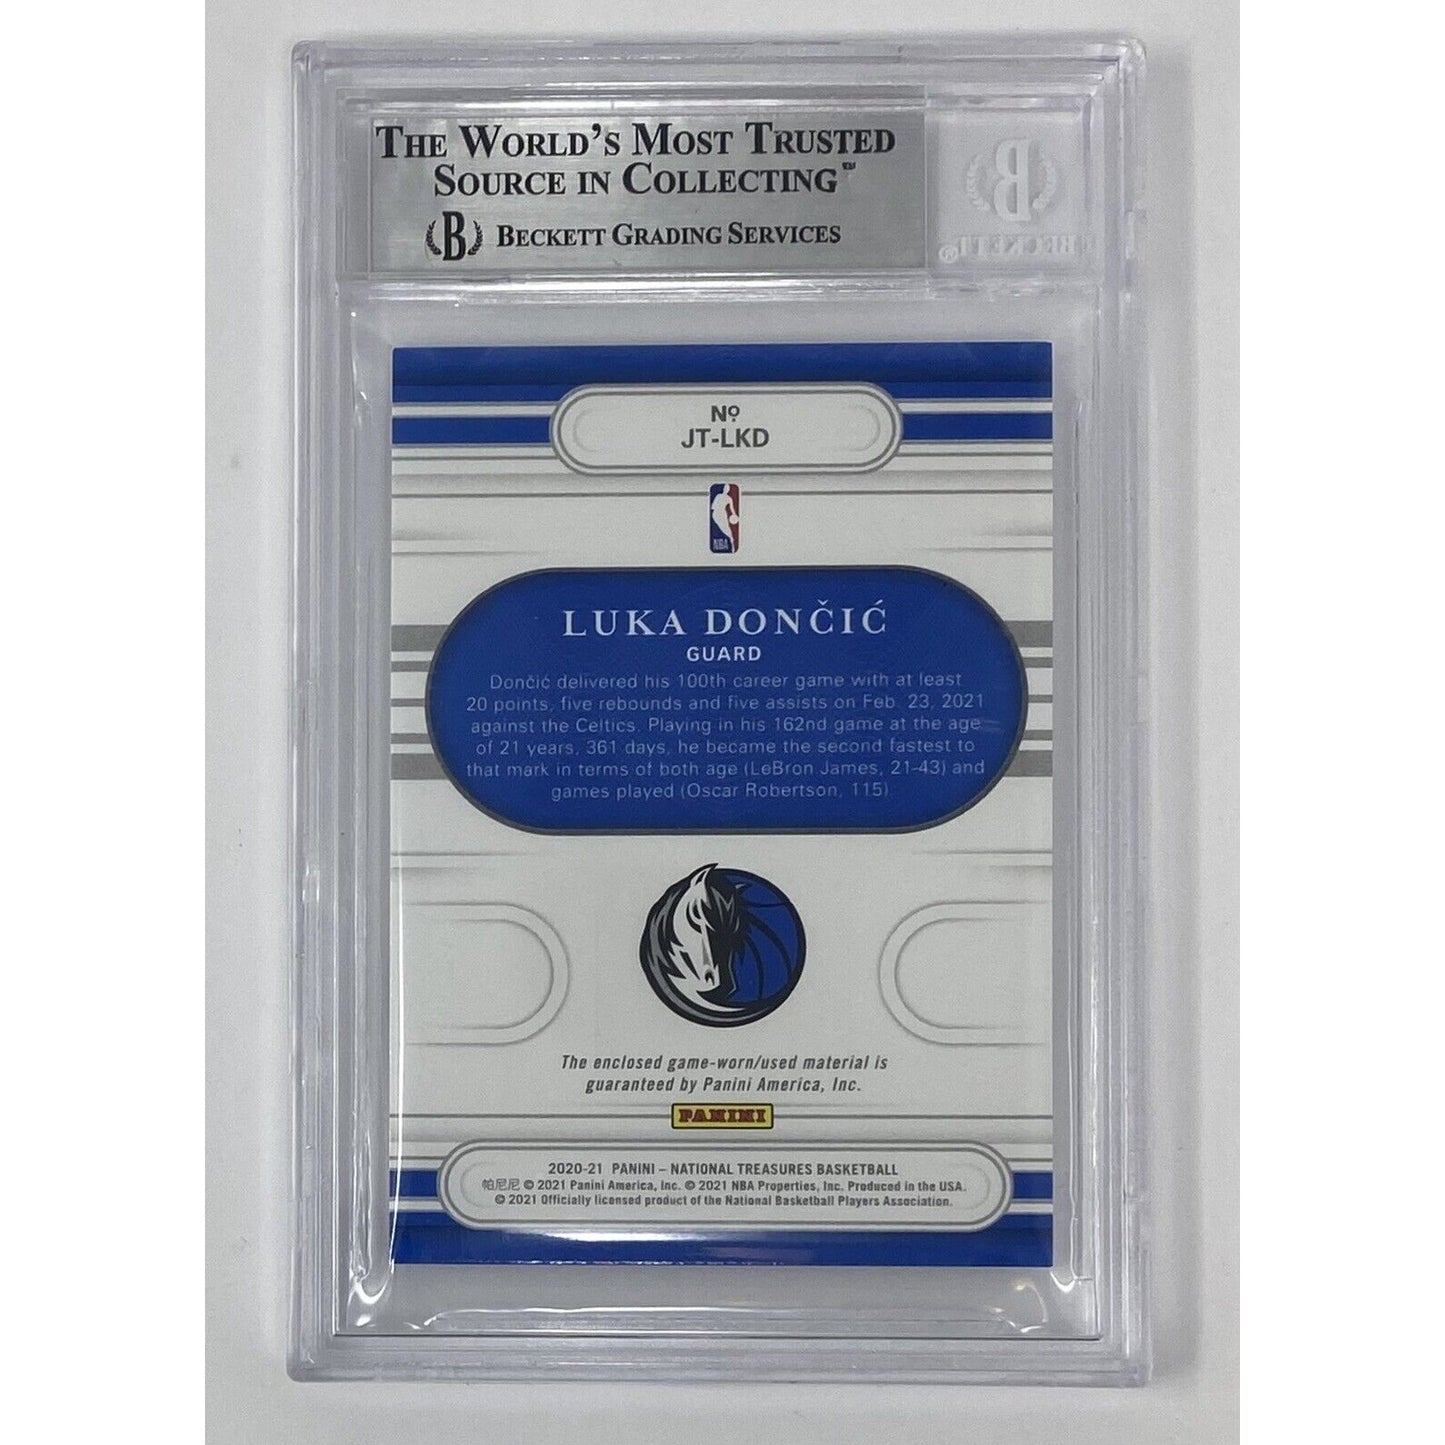 Beckett 8.5 NM-MT+ #39 Luka Doncic 2020-21 Panini National Treasures Patch Card